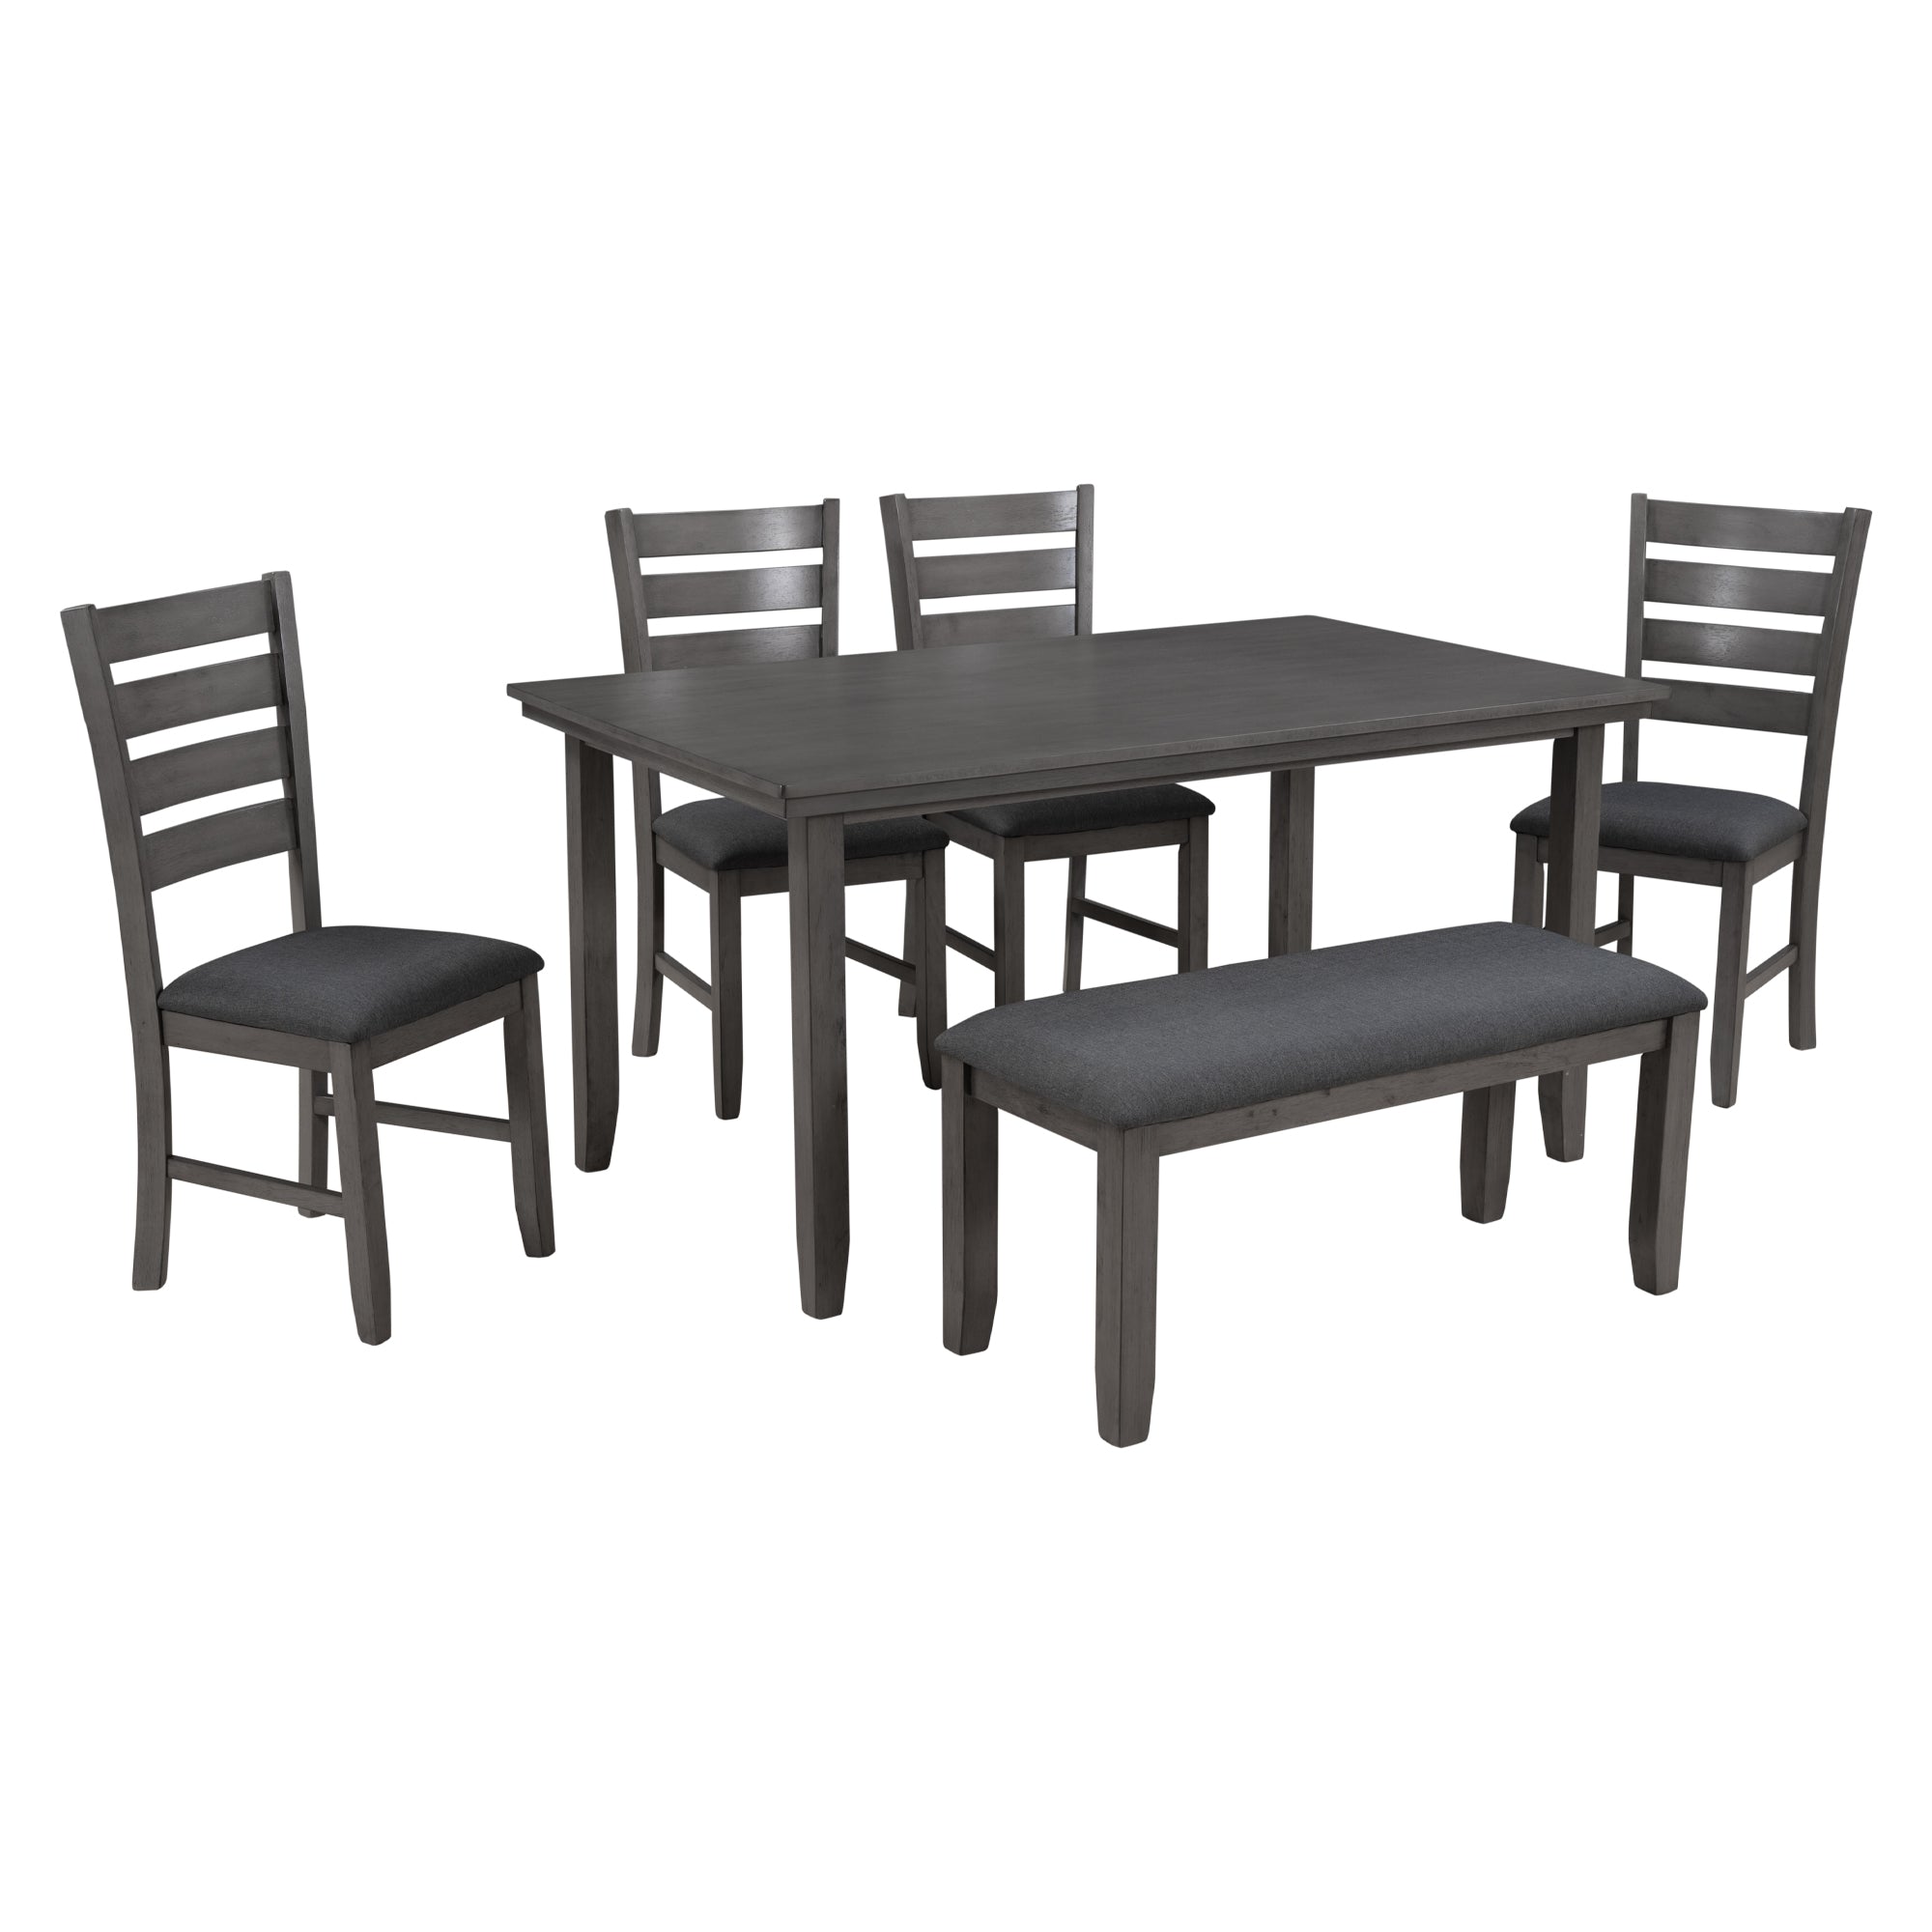 Dining Room Table and Chairs with Bench, Rustic Wood Dining Set, Set of 6 (Gray)-Boyel Living